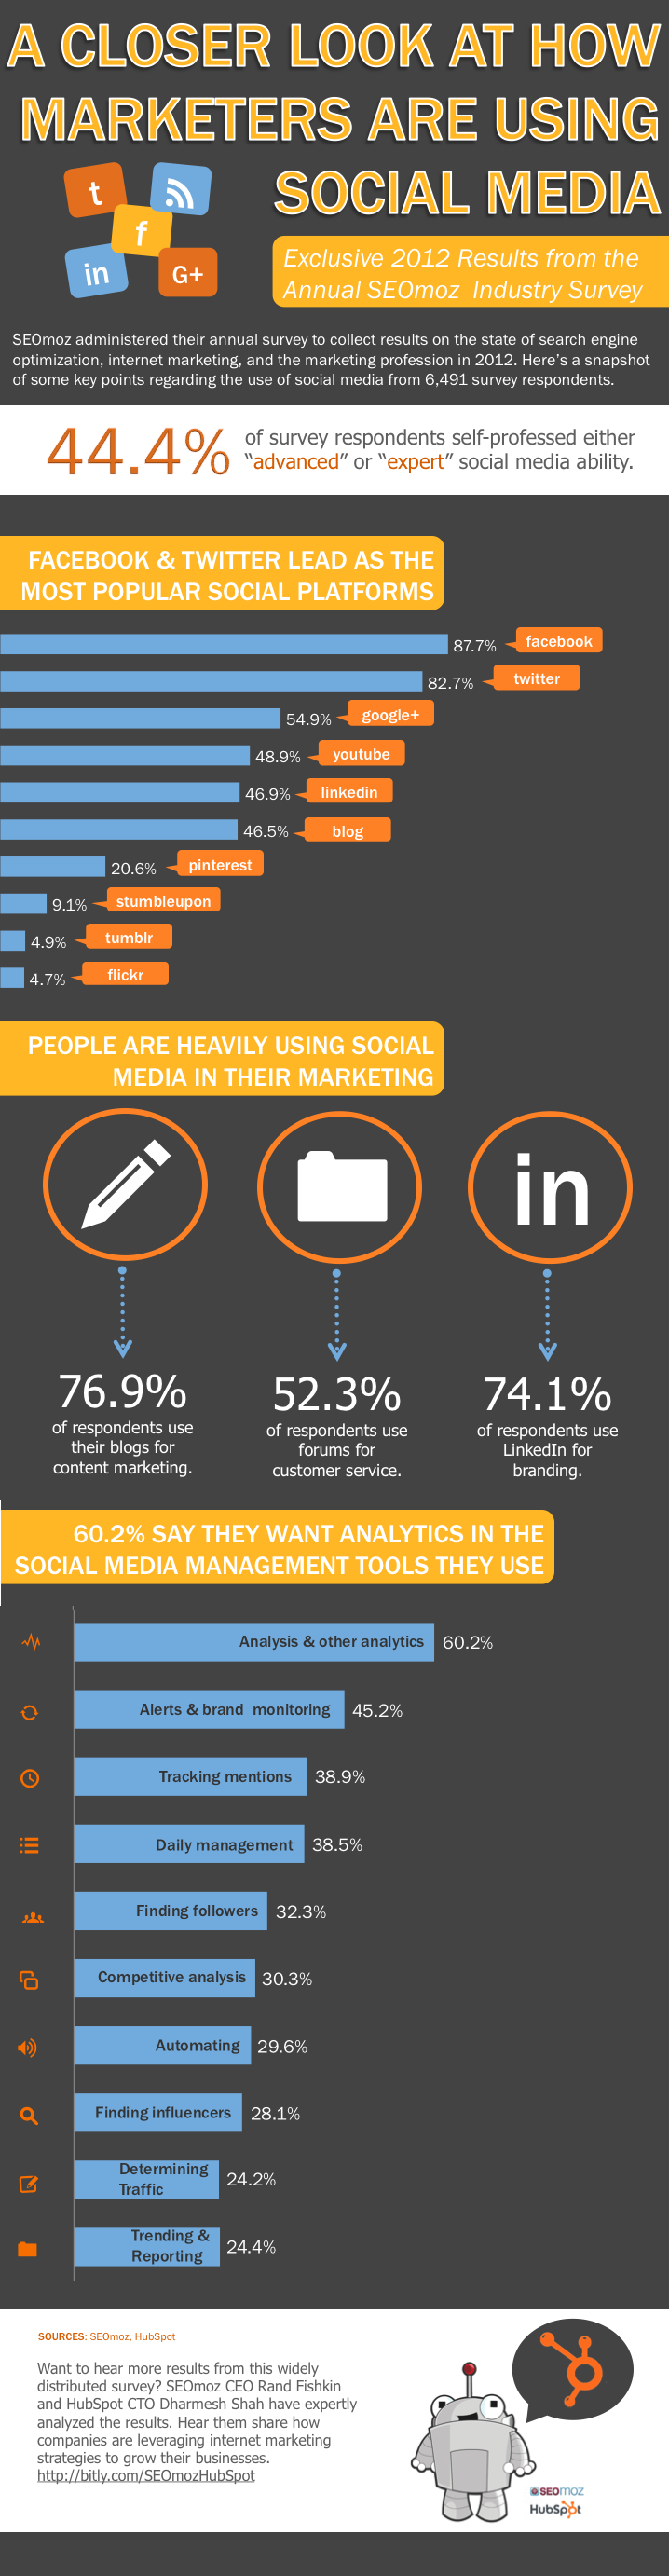 How are Marketers Using Social Media? #infographic